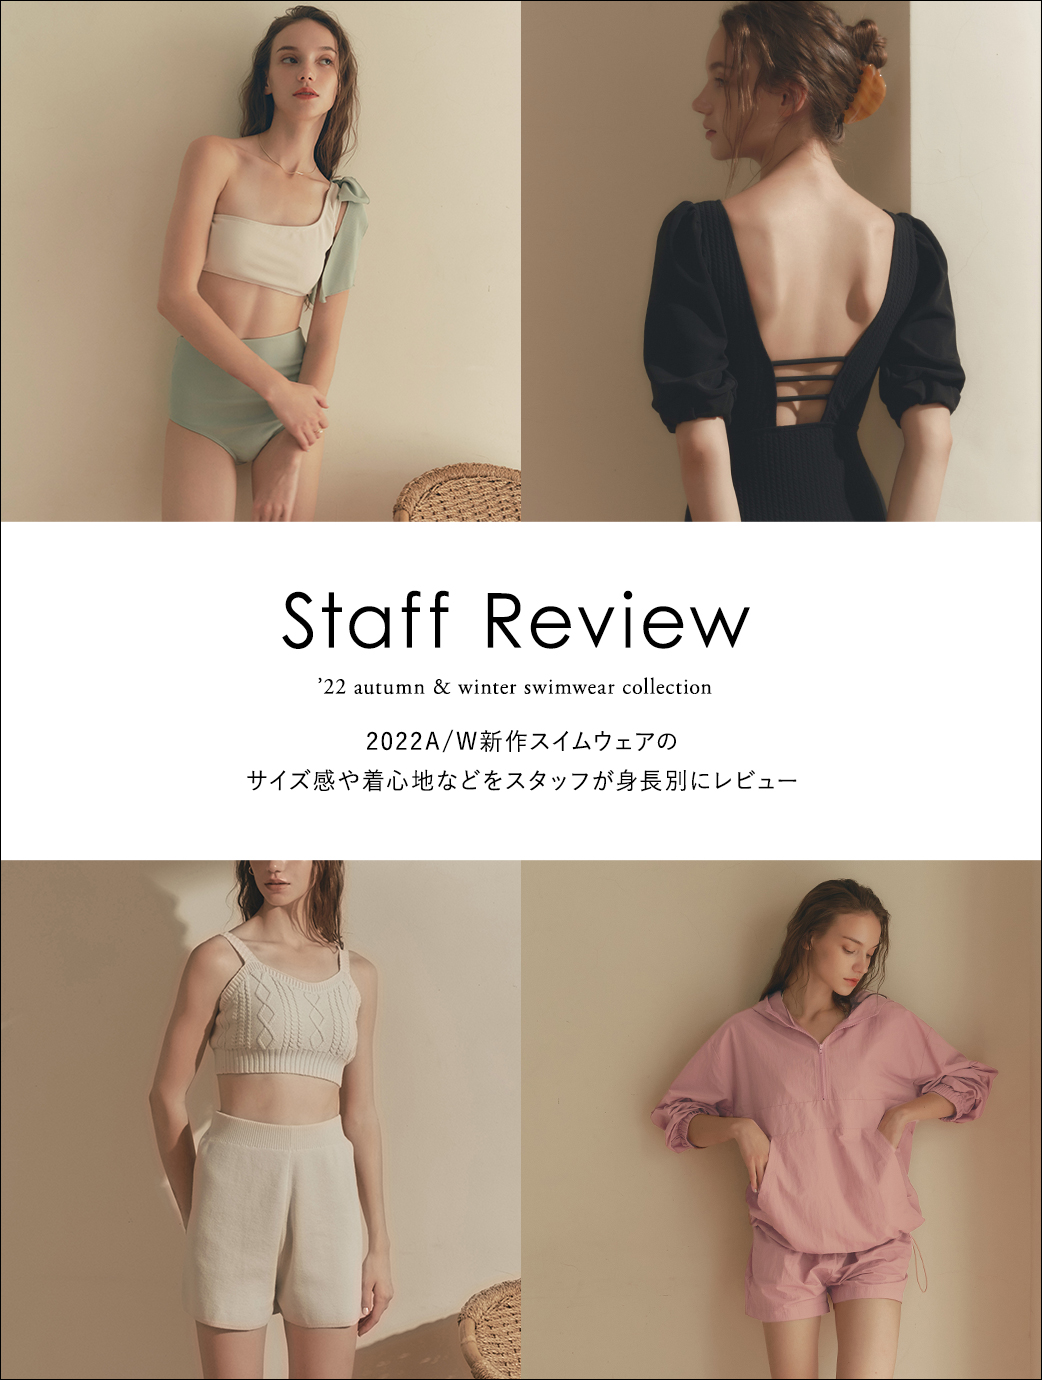 Staff Review 2022A/W